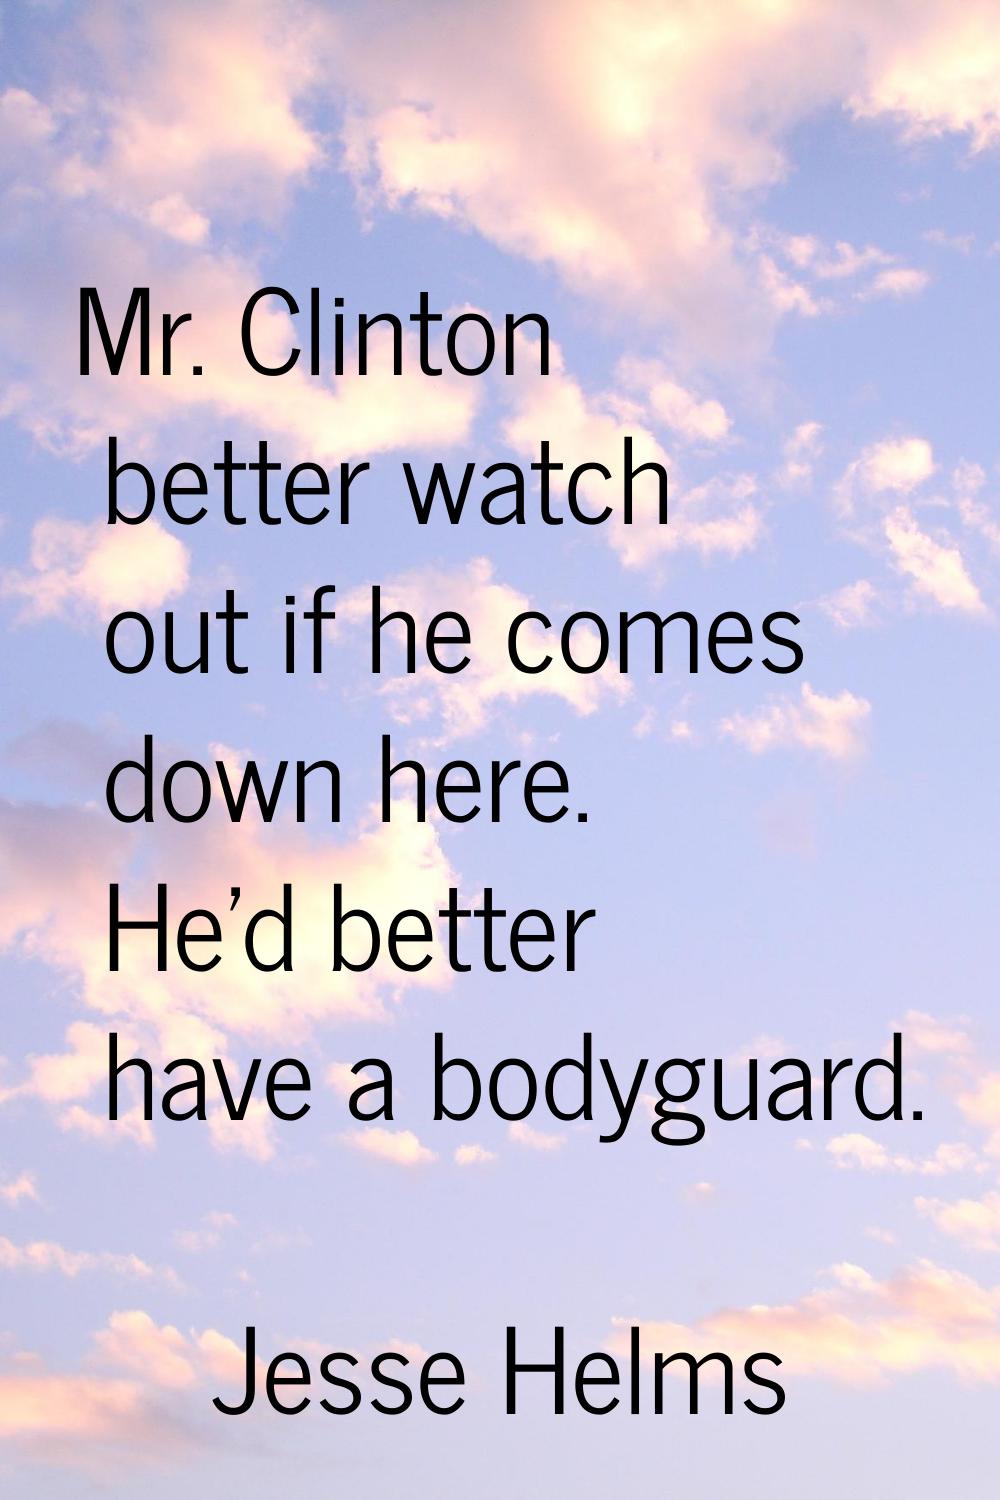 Mr. Clinton better watch out if he comes down here. He'd better have a bodyguard.